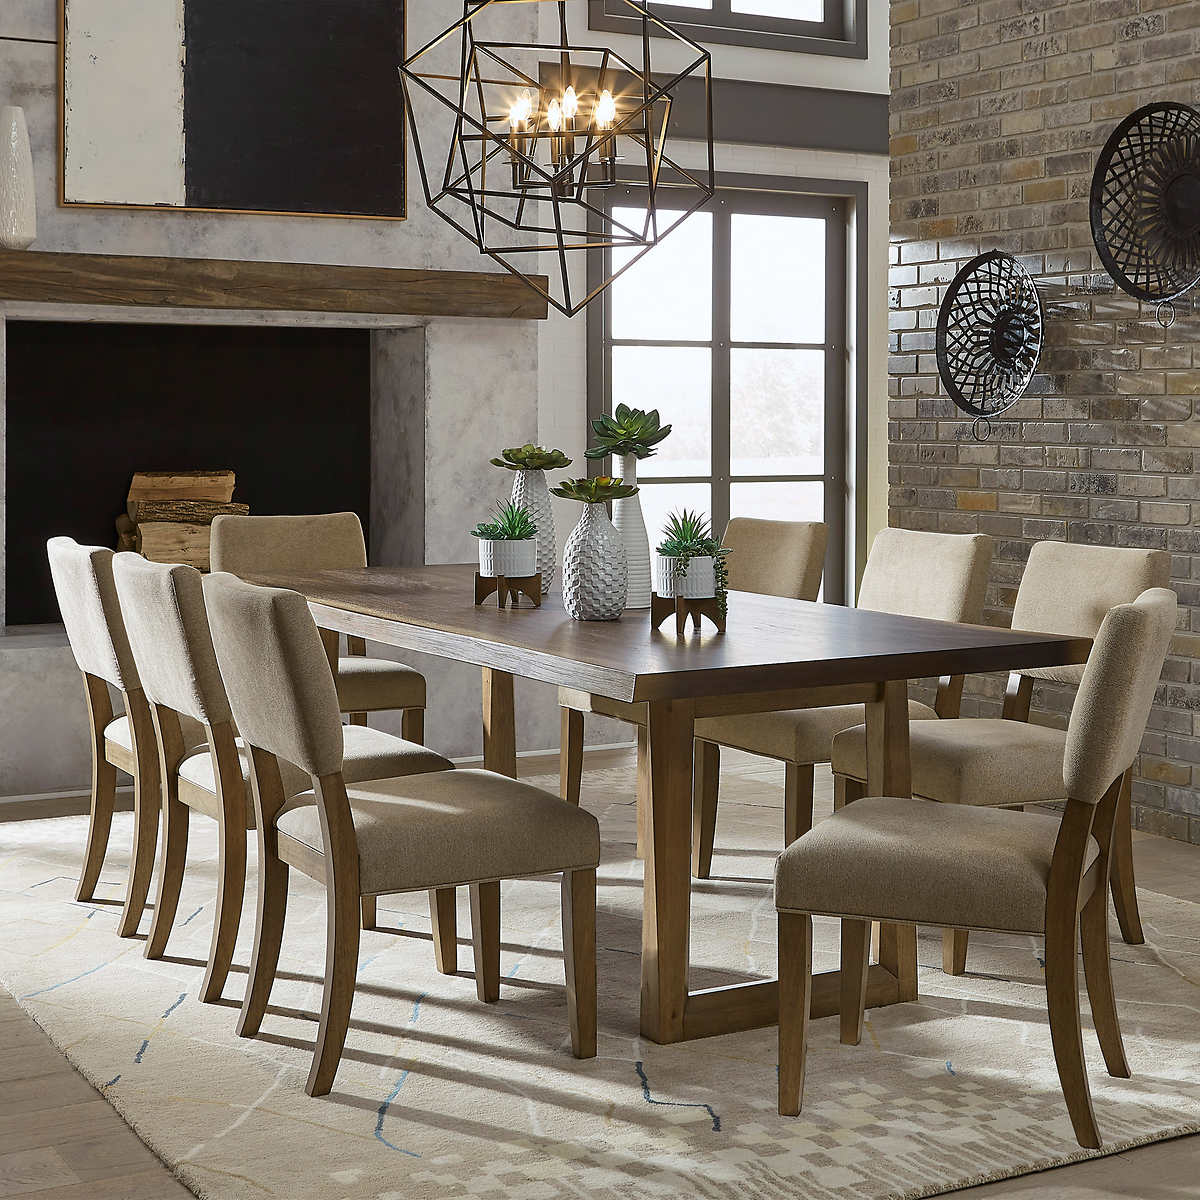 Ellery Park 9 Piece Dining Set Costco, Refinish Dining Room Table Veneer Toppers